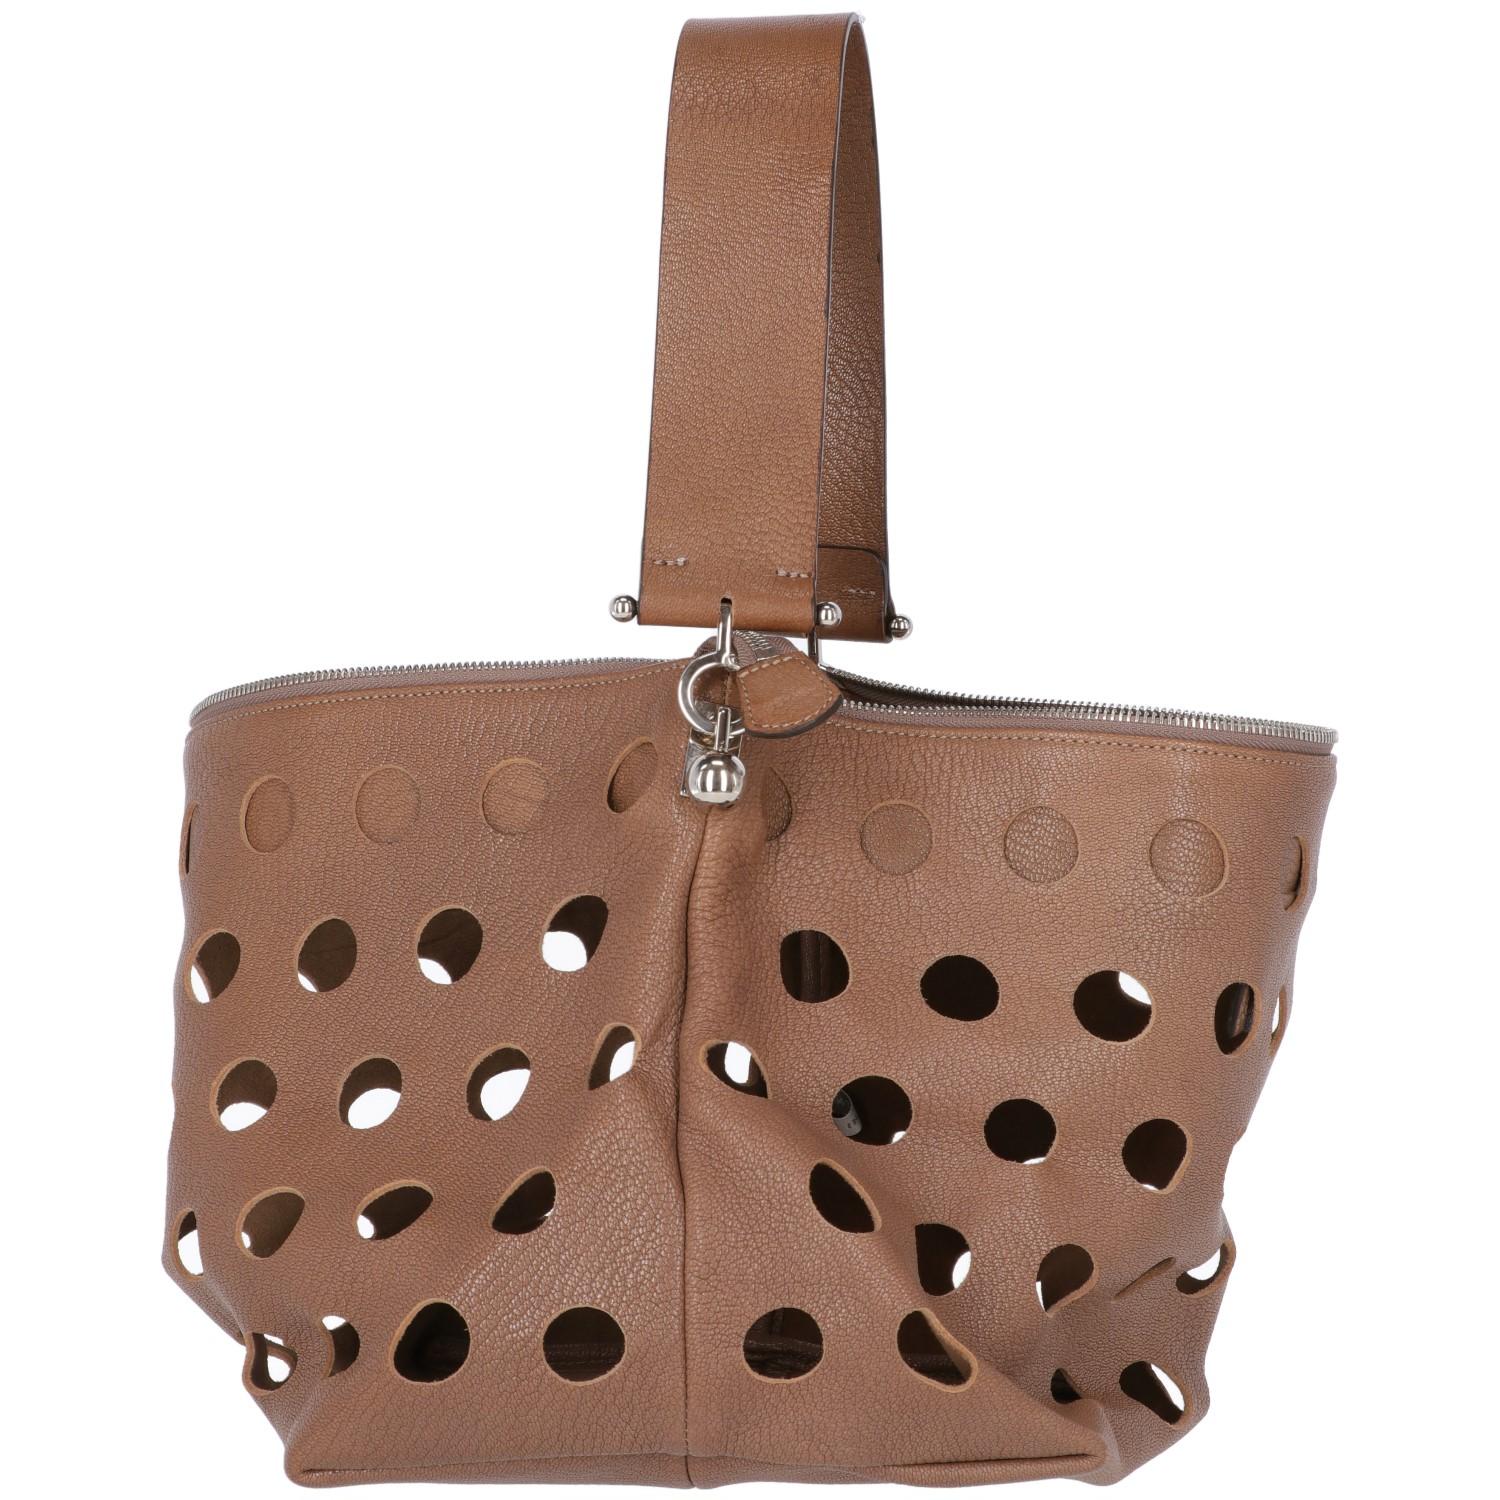 Marni soft brown leather shoulder bag, trapezoid-shaped and perforated, has a removable brown leather handle and a zip closure.

Years: 2000s

Made in Italy

Width: 42 cm
Height: 24 cm
Depth: 22 cm
Handle: 48 cm